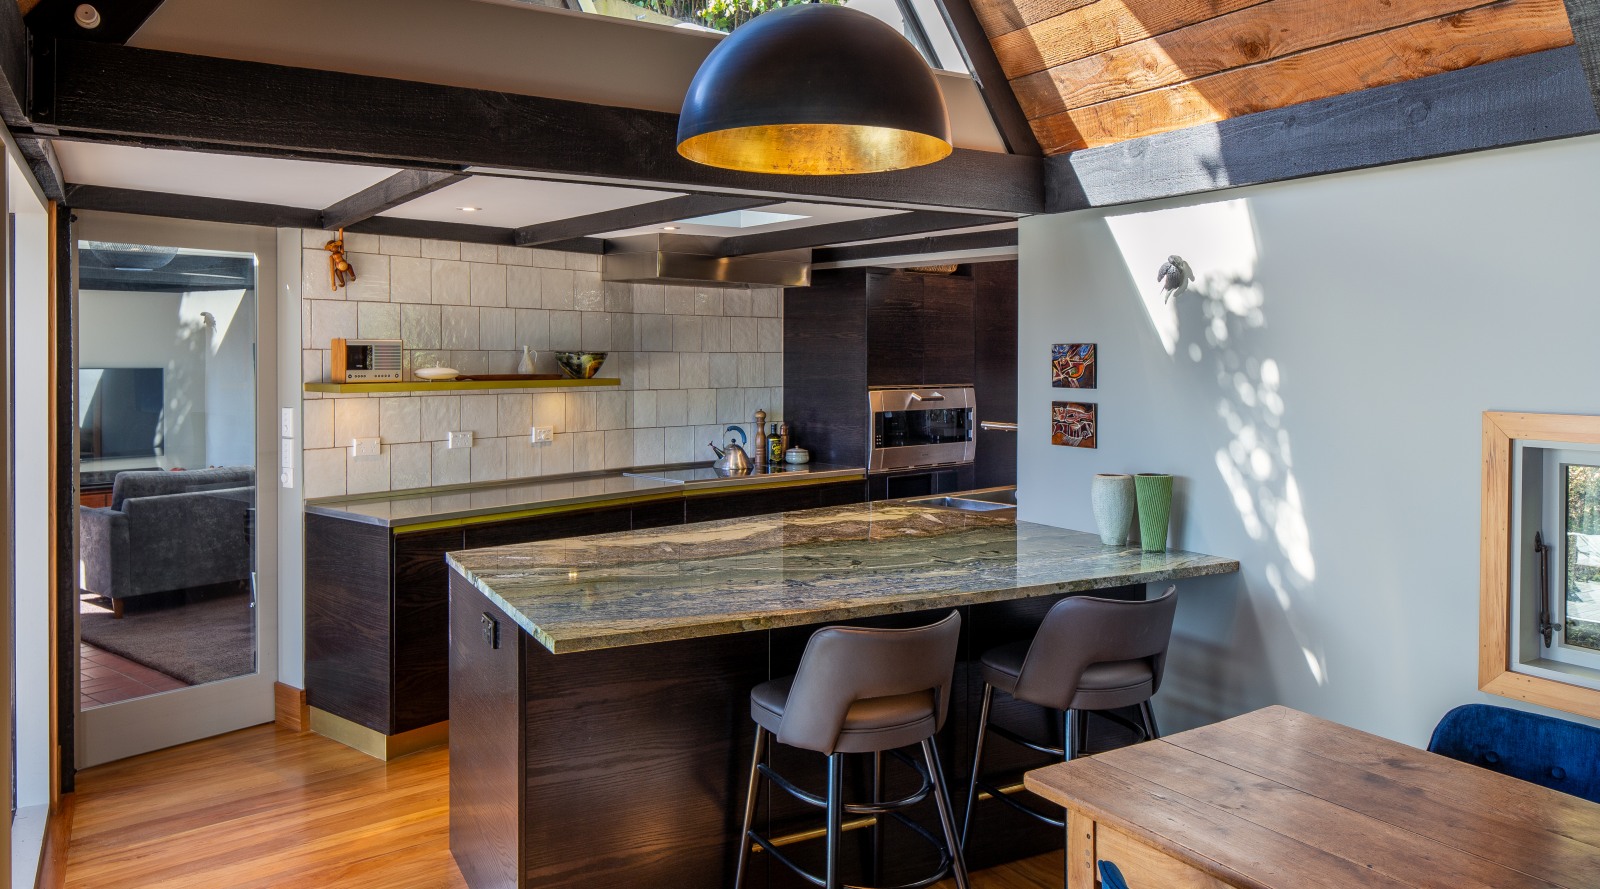 Iconic home gets a lush kitchen Trends